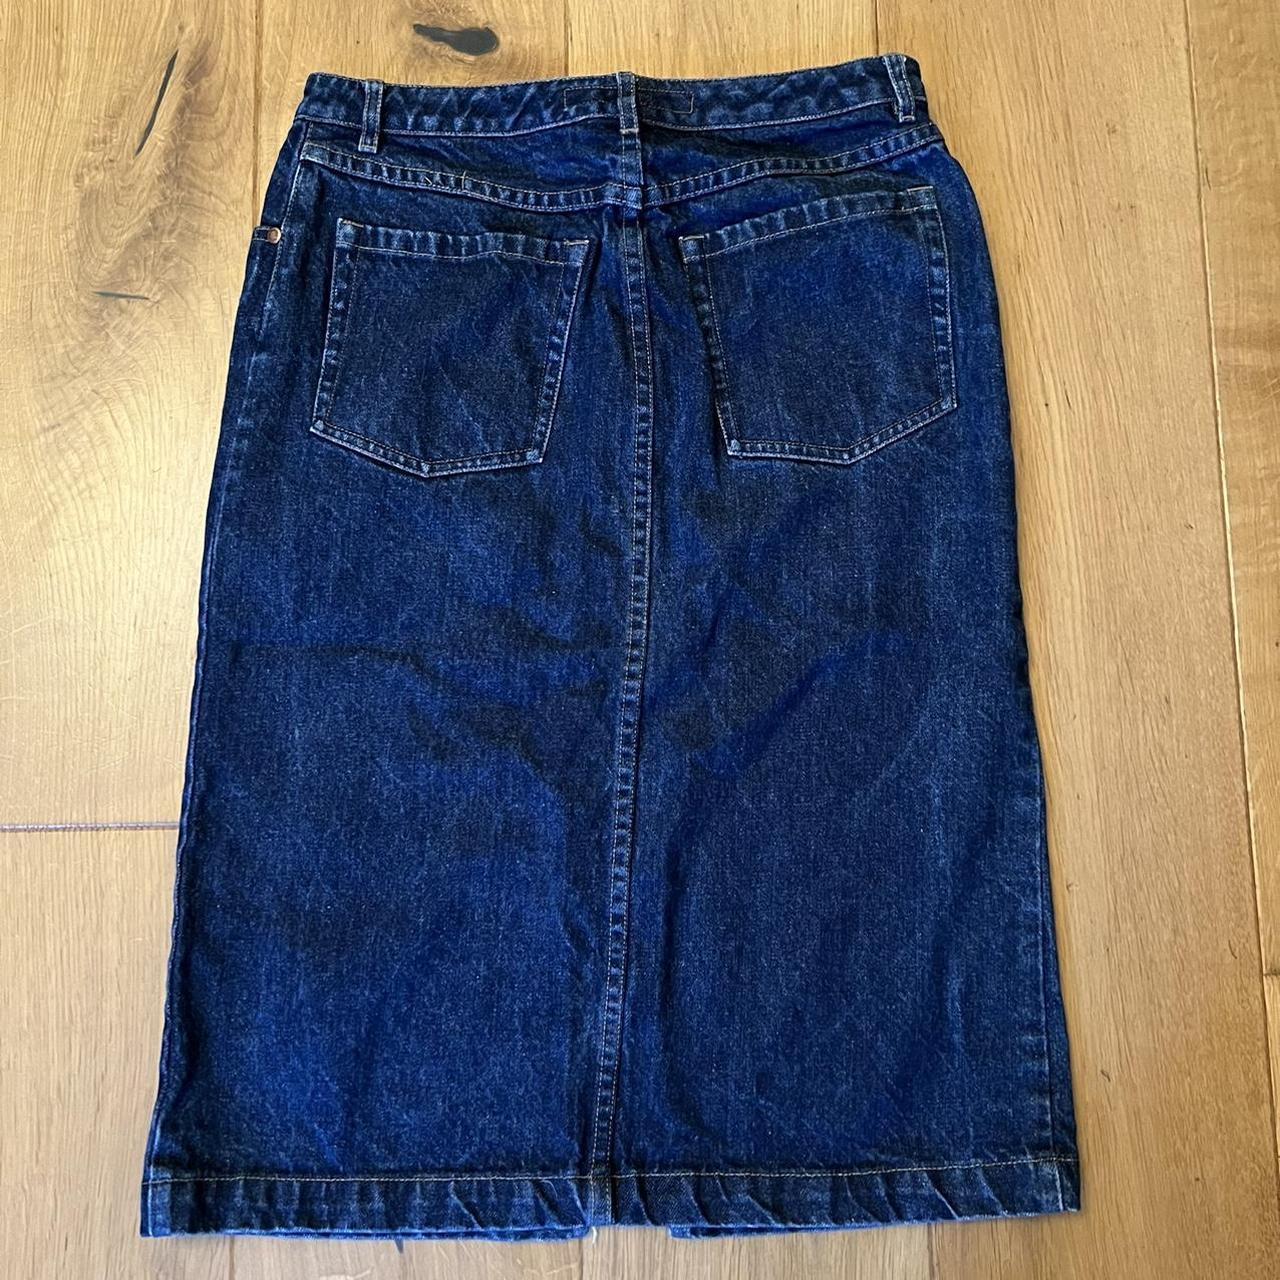 French Connection Women's Blue Skirt | Depop